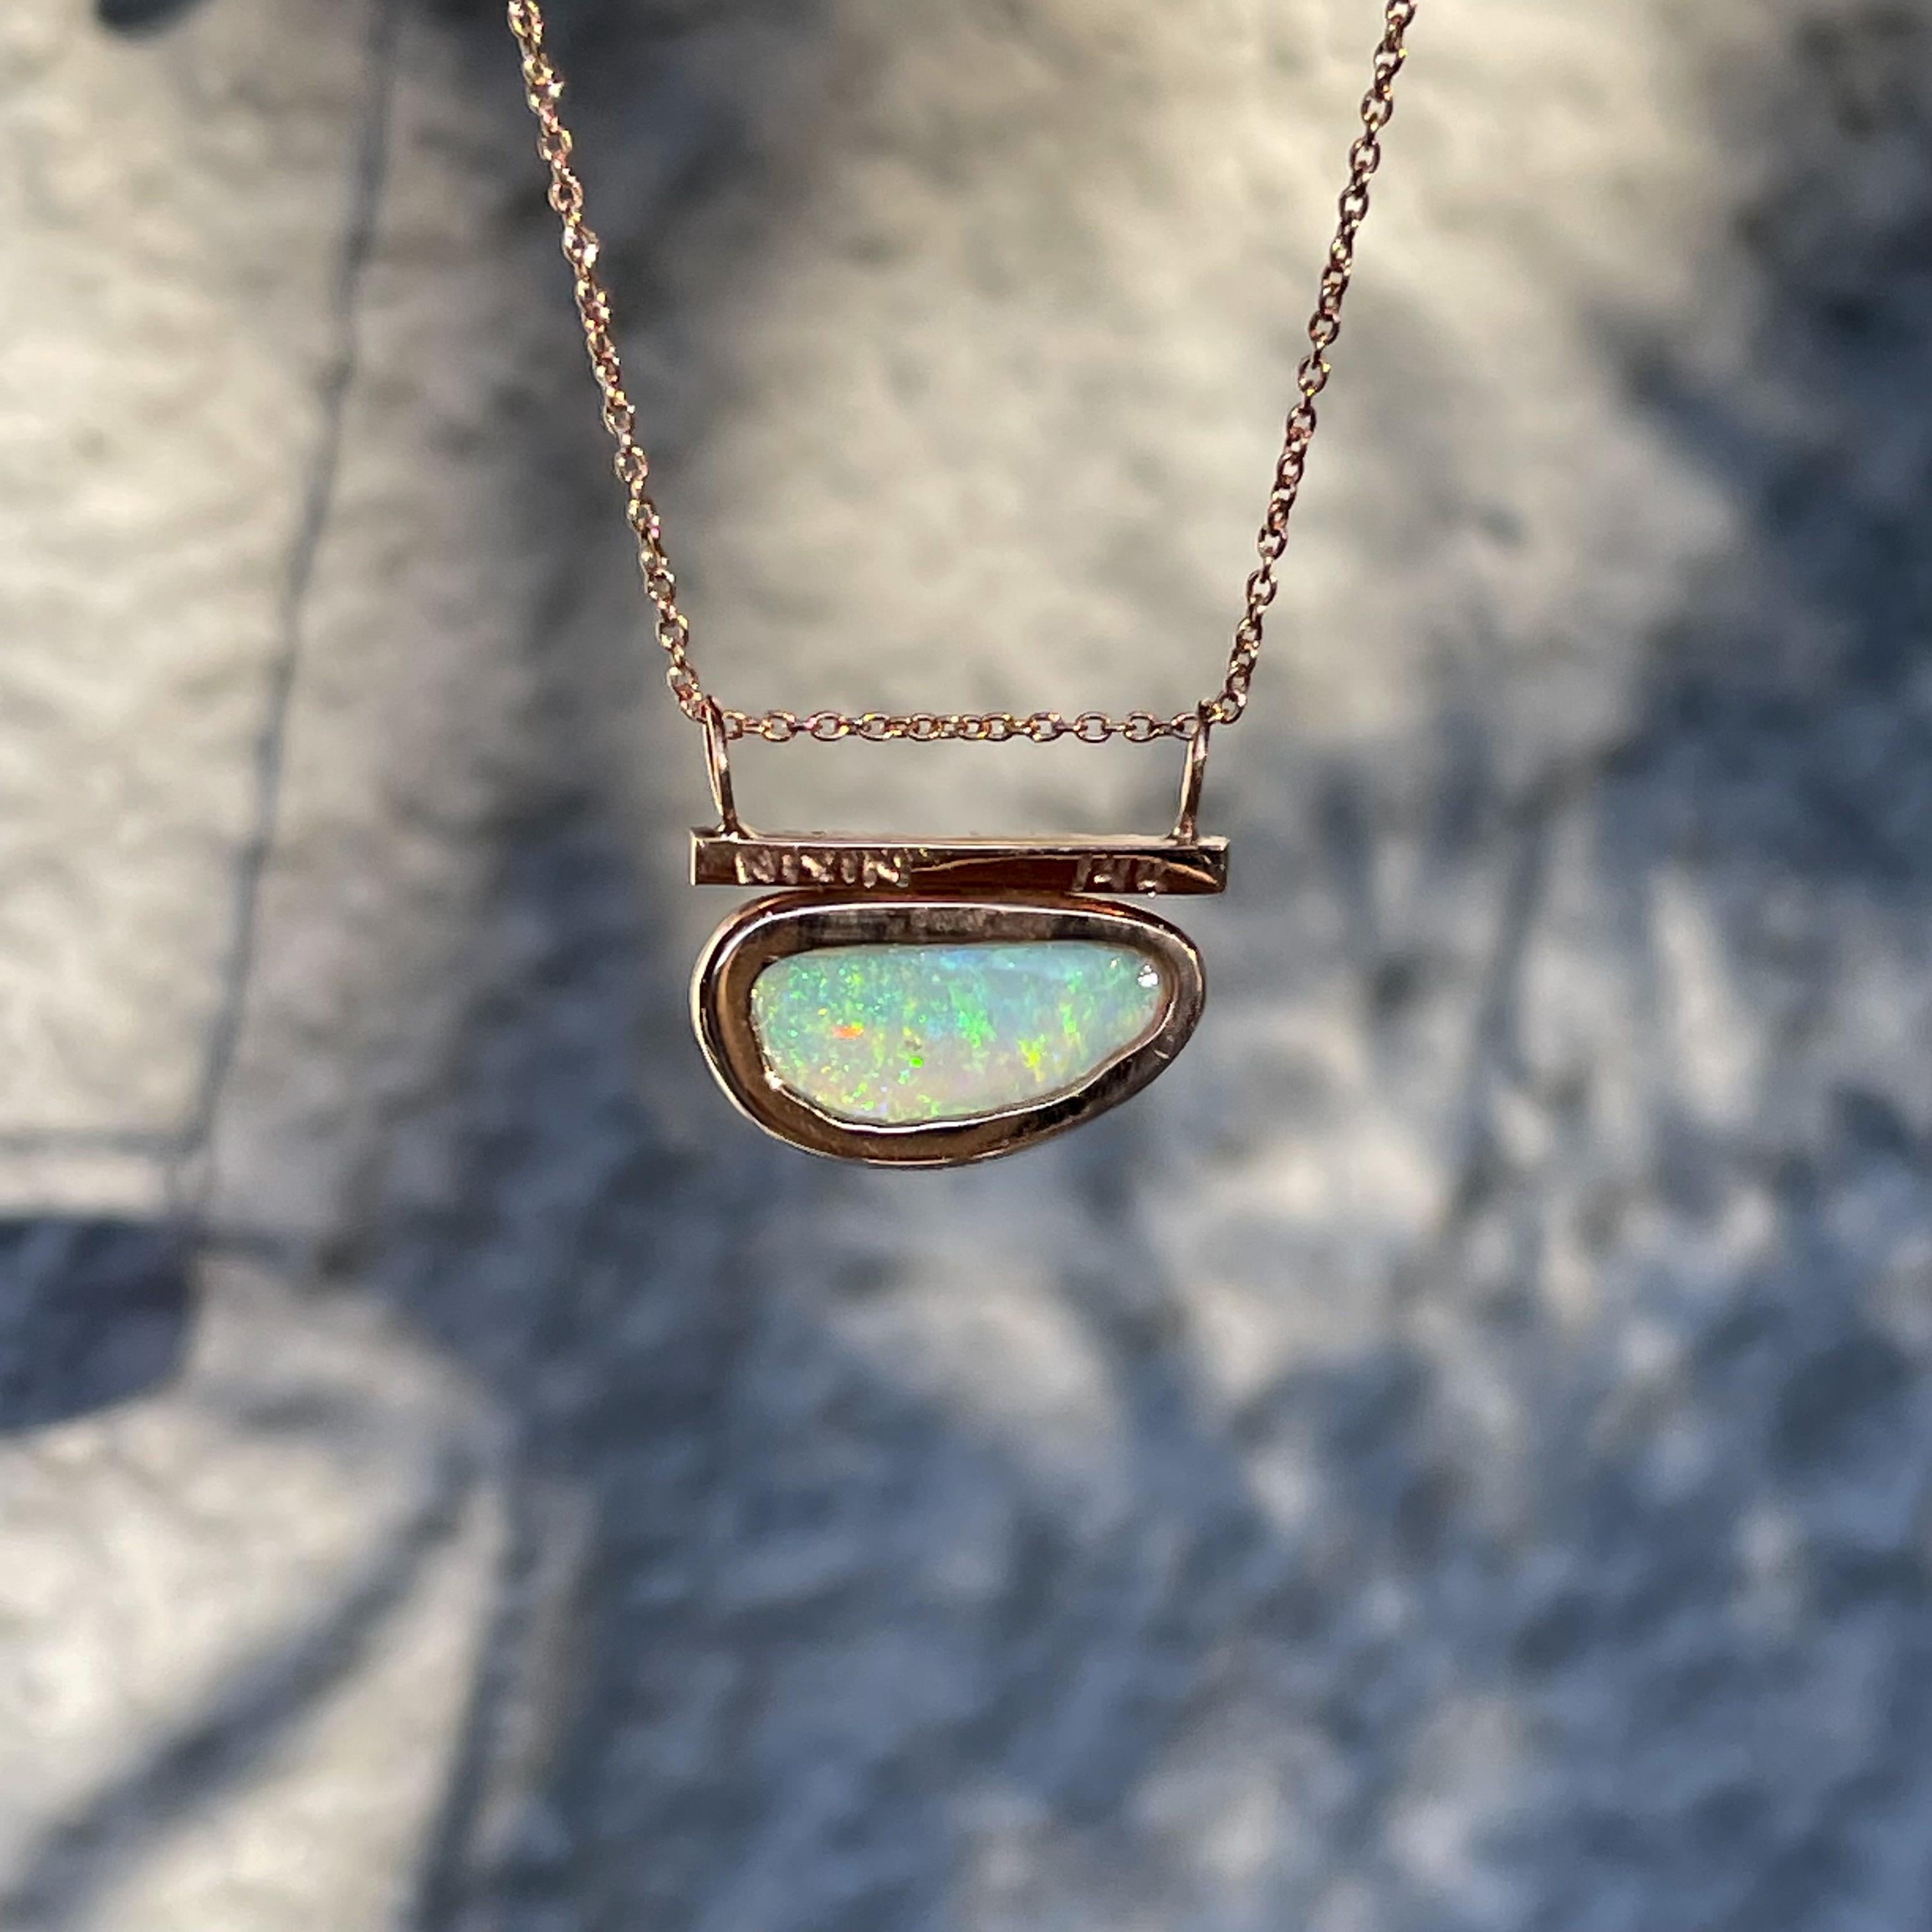 Head in the Clouds Crystal Opal Necklace No. 16 with Diamonds by NIXIN Jewelry For Sale 5